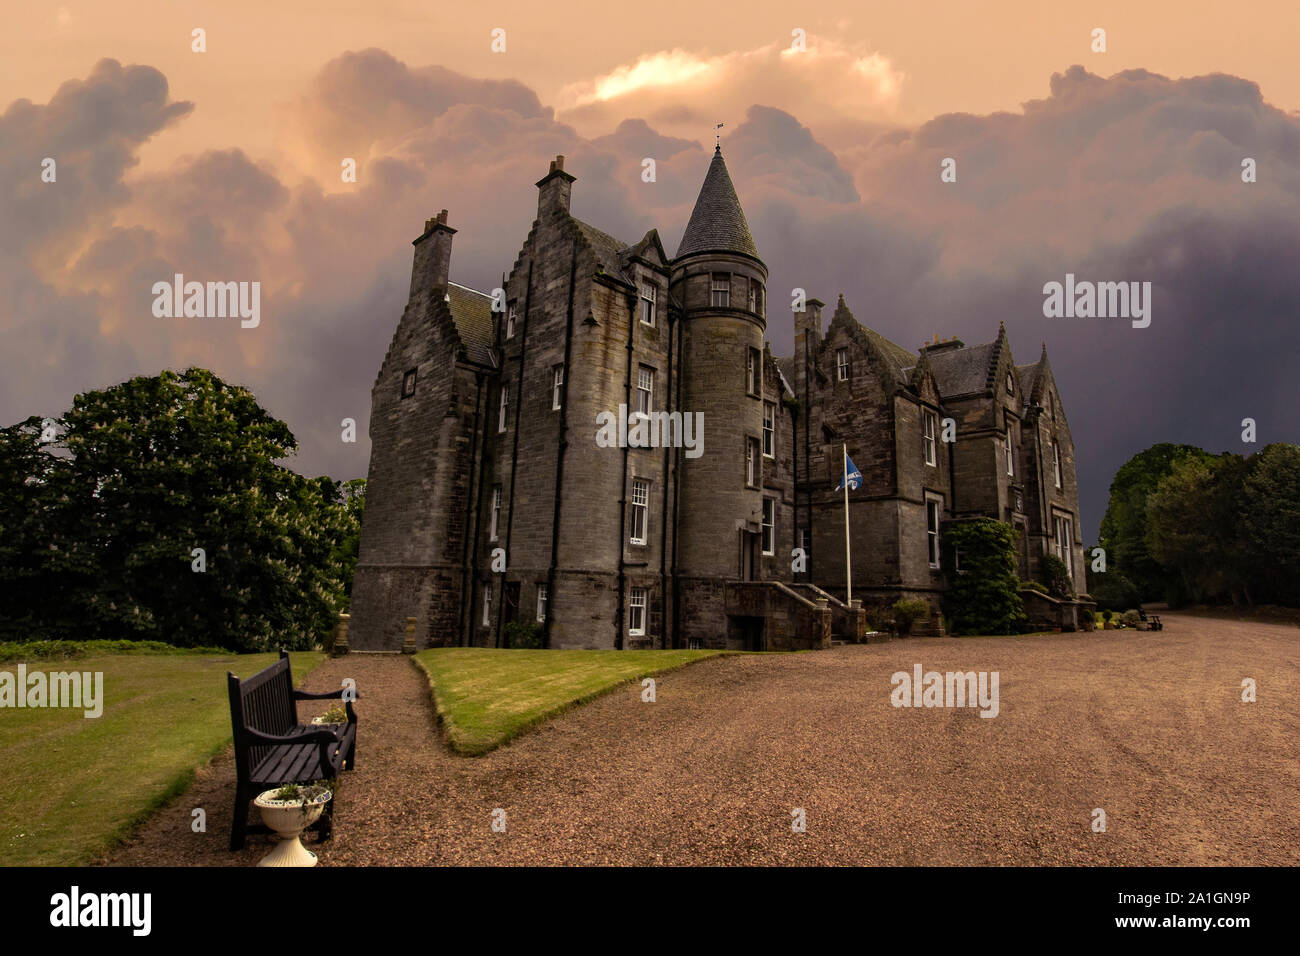 A private castle outside of St Andrews, Scotland with a storm brewing Stock Photo